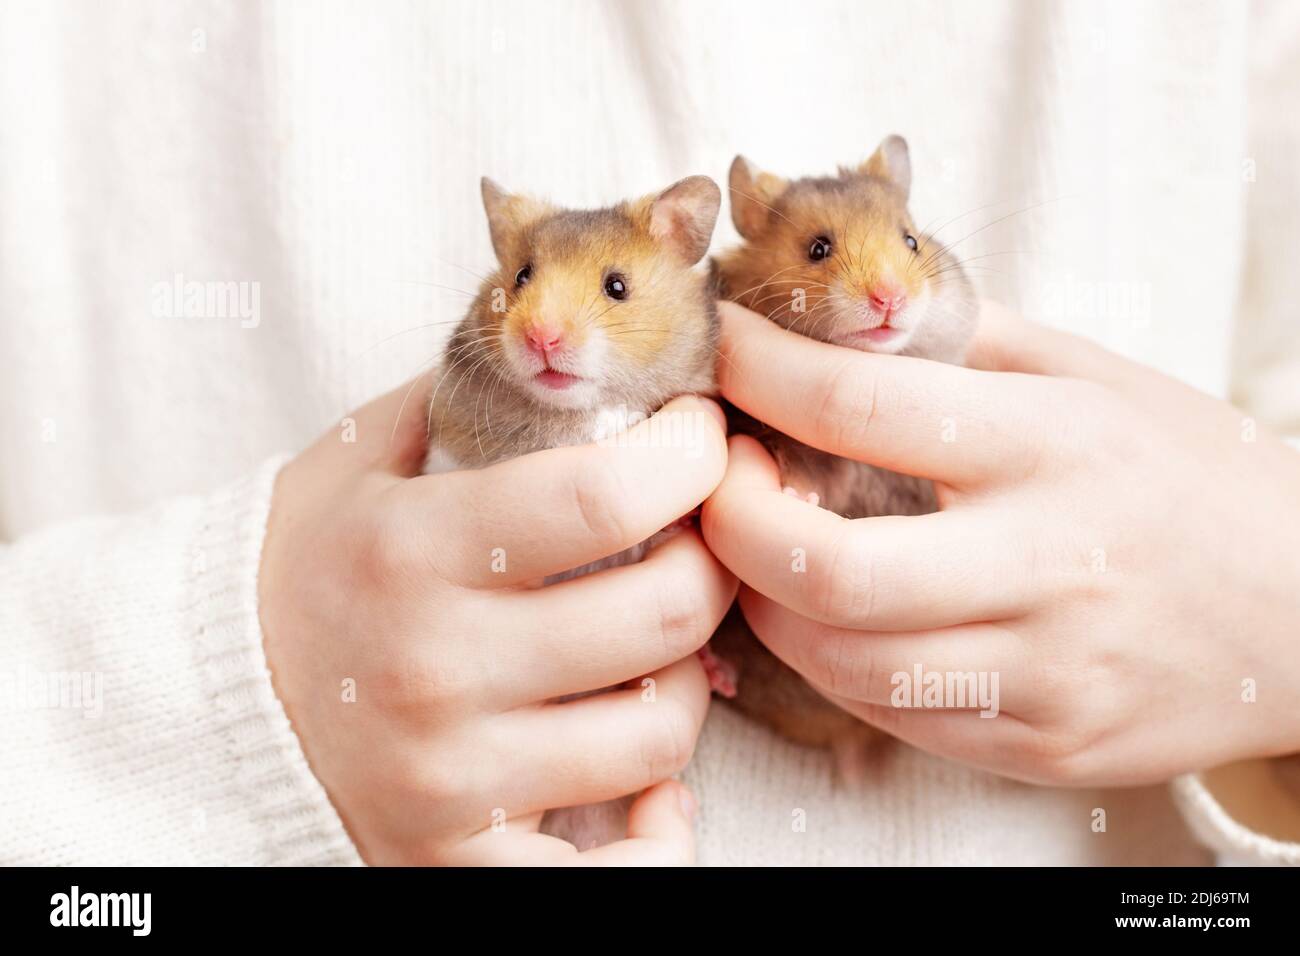 Two cute fluffy golden hamsters in the hands of a child on a light background. Beautiful postcard with an animal theme. Stock Photo